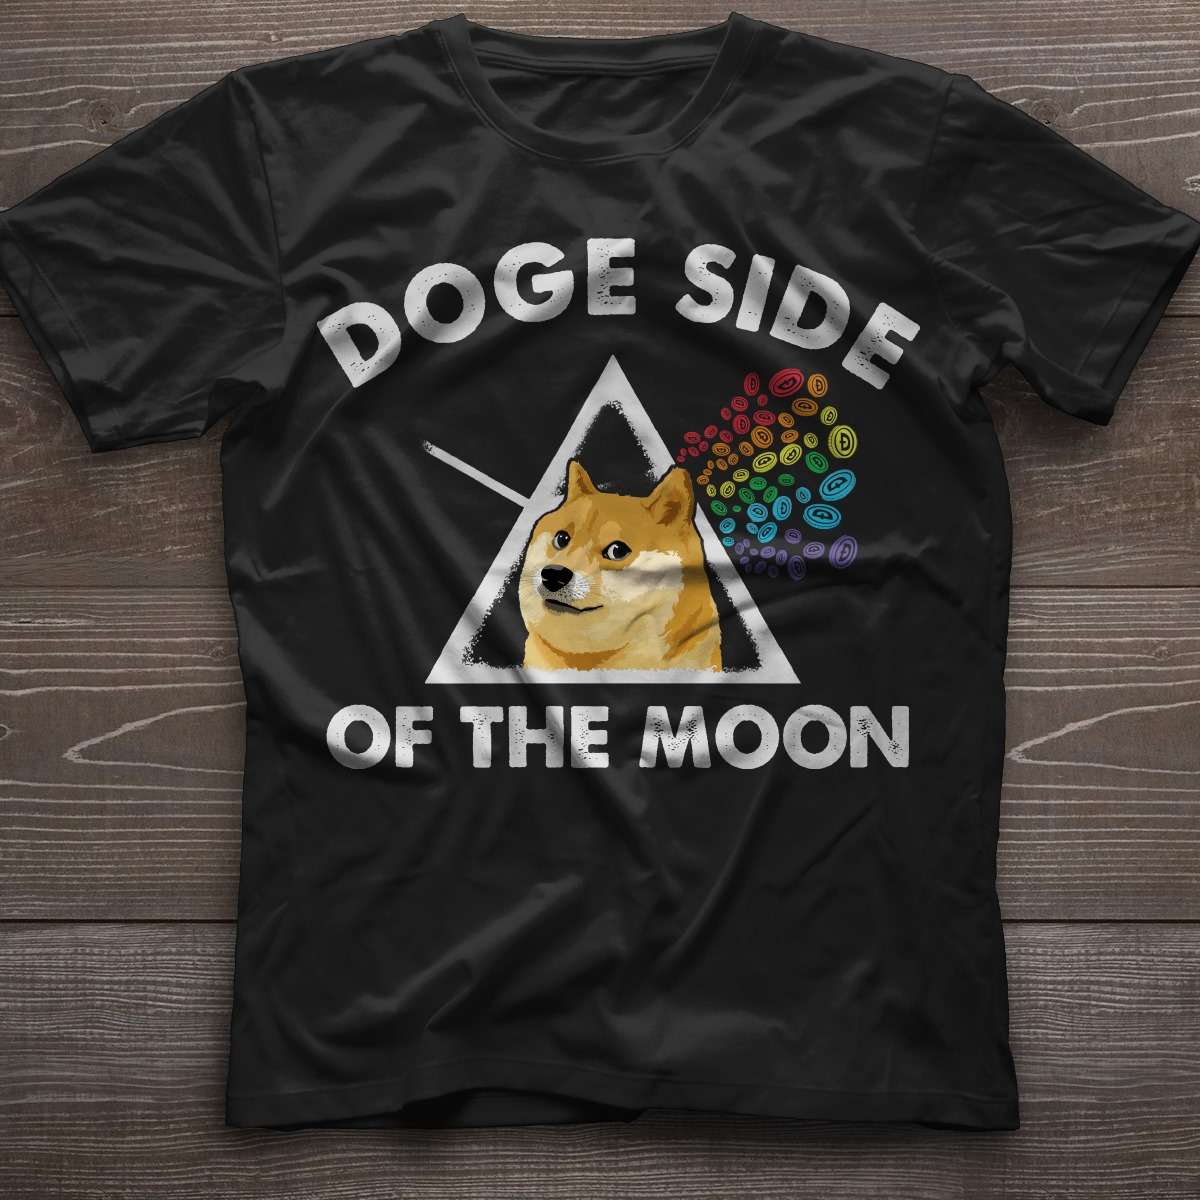 Doge side of the moon - Doge coin, cheme meme